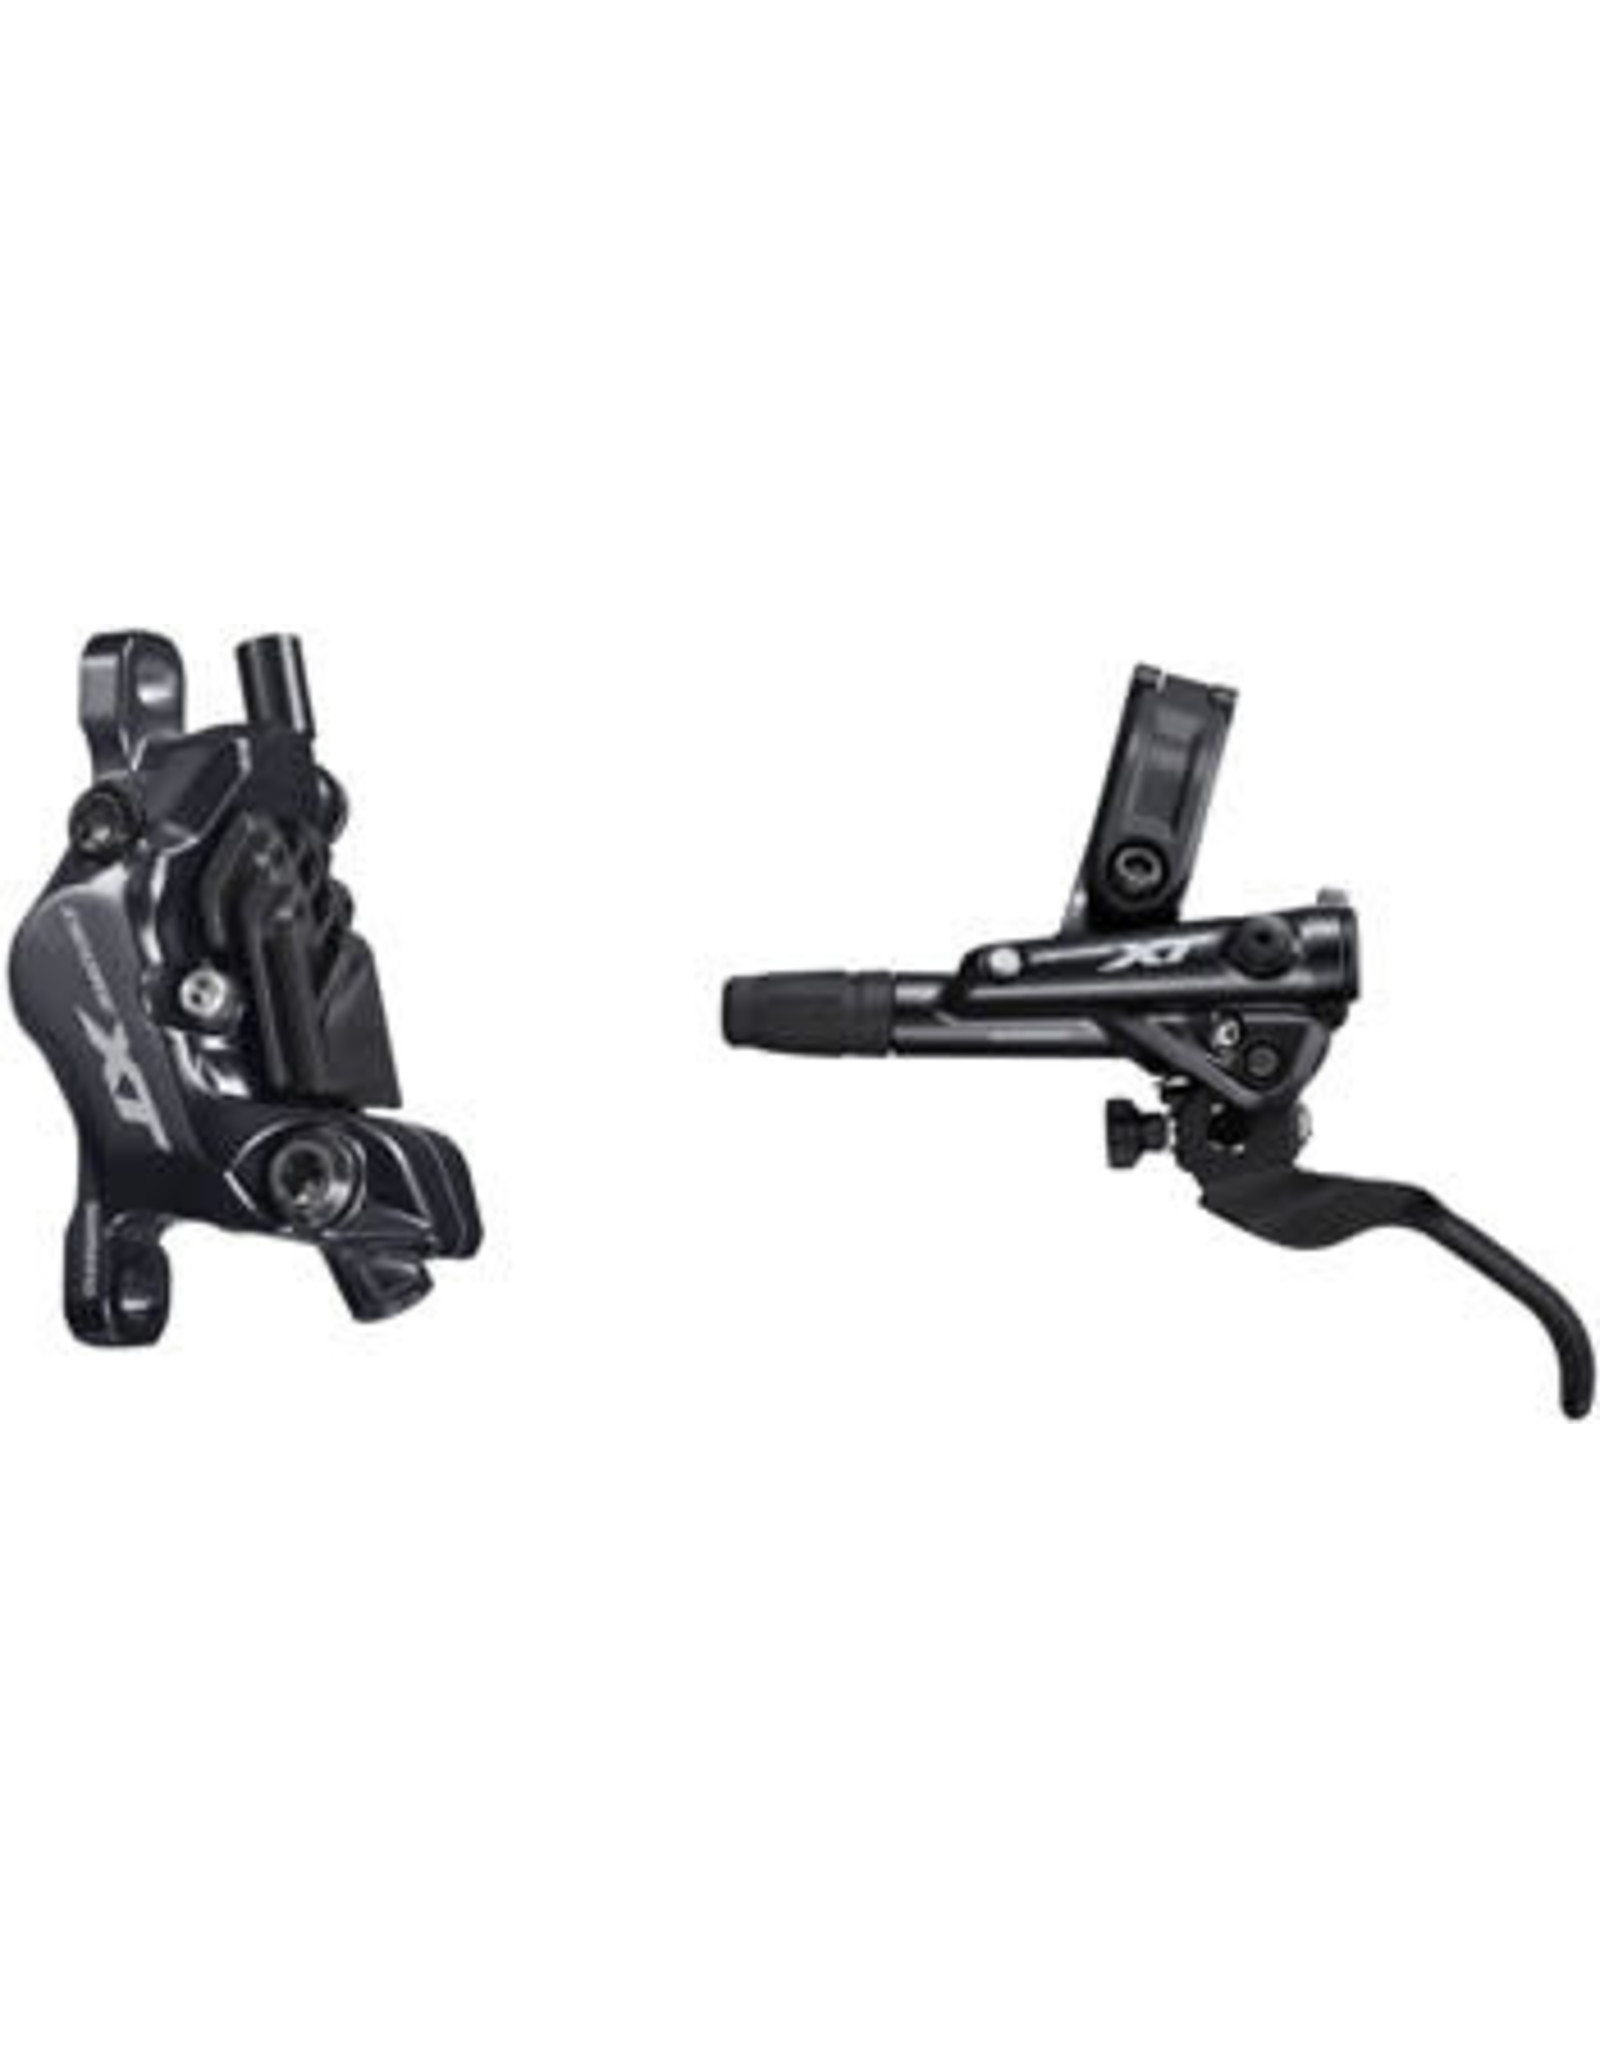 Shimano Shimano Deore XT BL-M8100/BR-M8120 Disc Brake and Lever - Front, Hydraulic, Post Mount, 4-Piston, Finned Metal Pads, Black